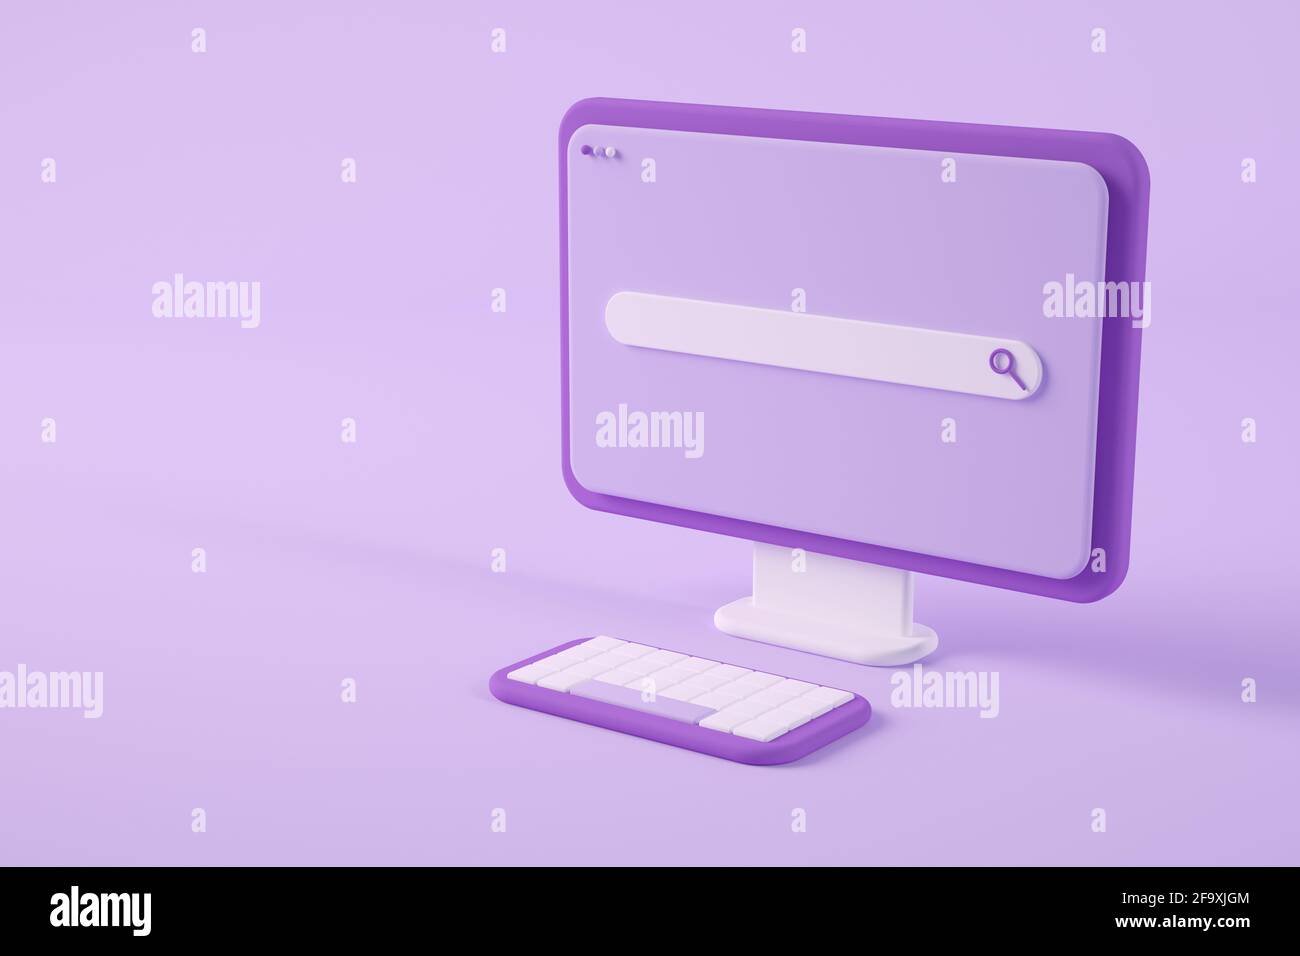 Minimal purple computer with online search 3d rendering Stock Photo